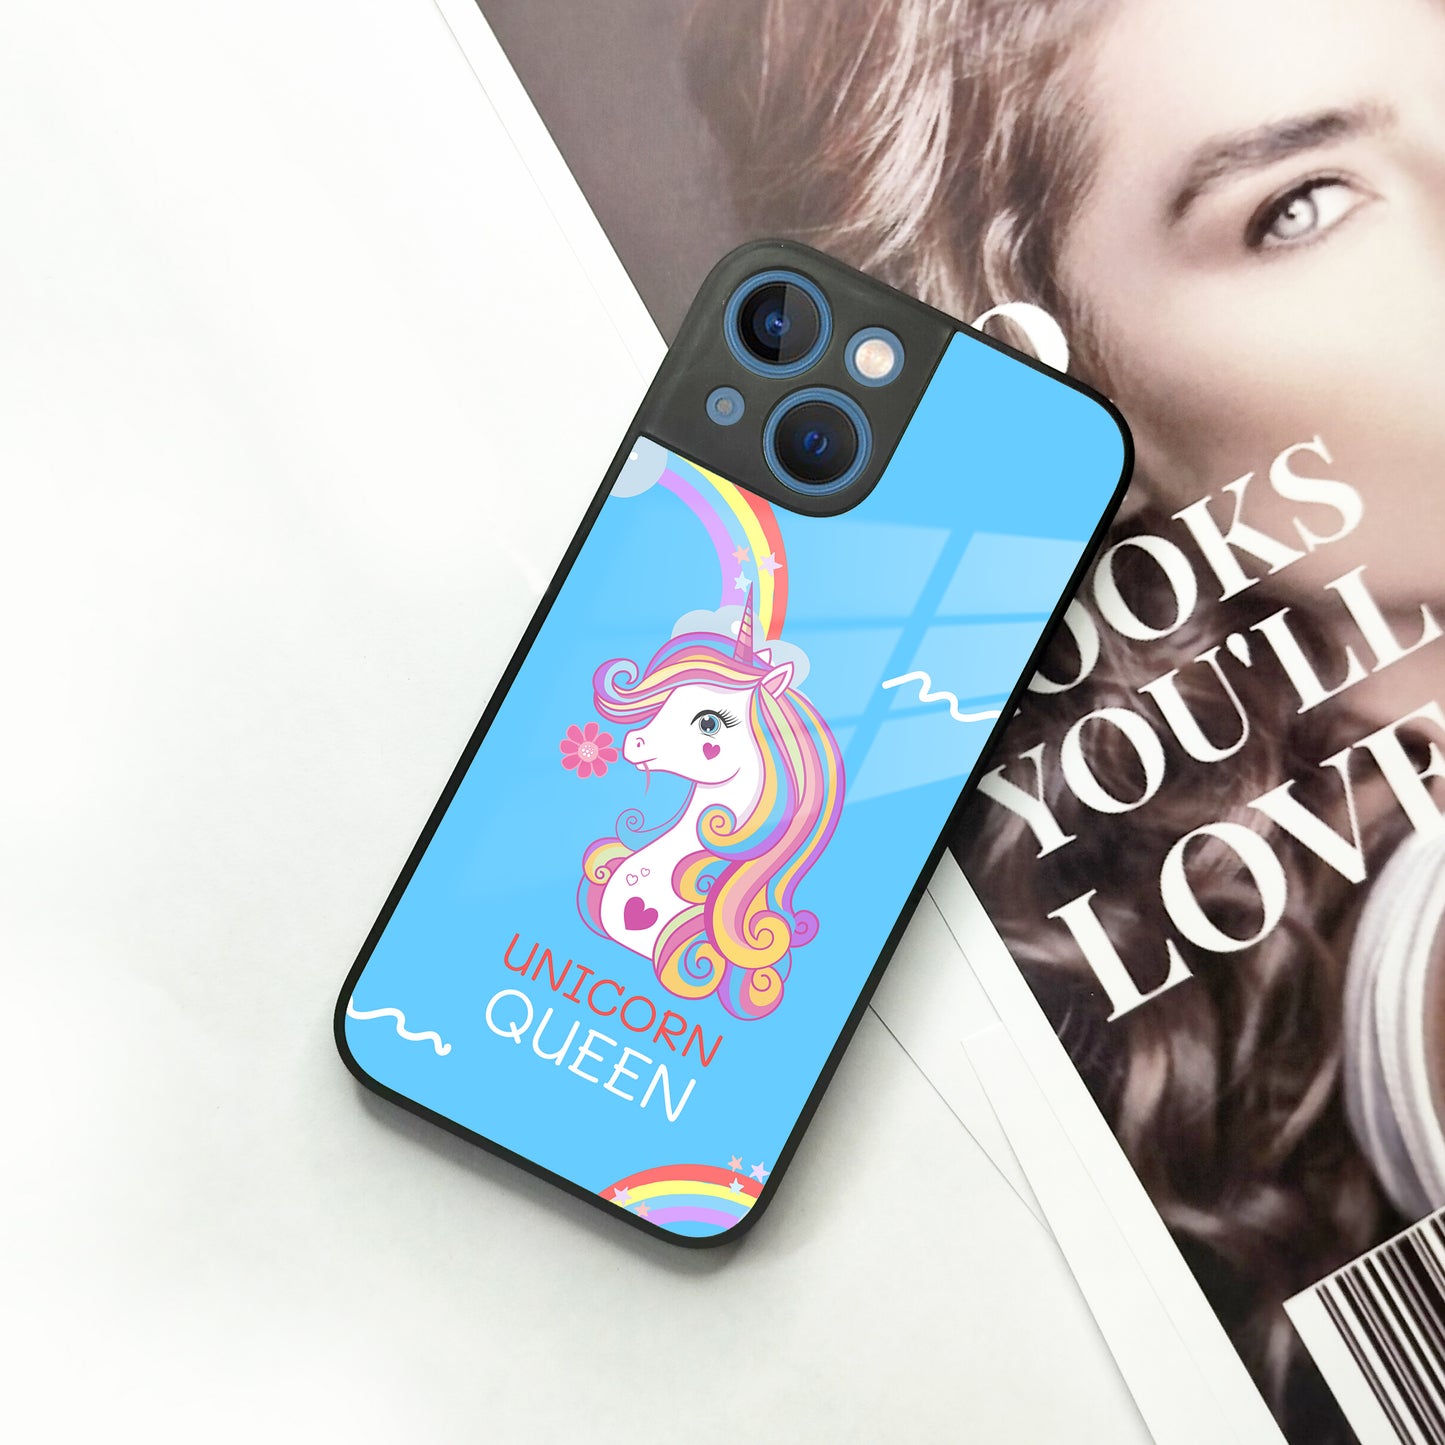 Blue Unicorn Queen Glass Phone Case For iPhone